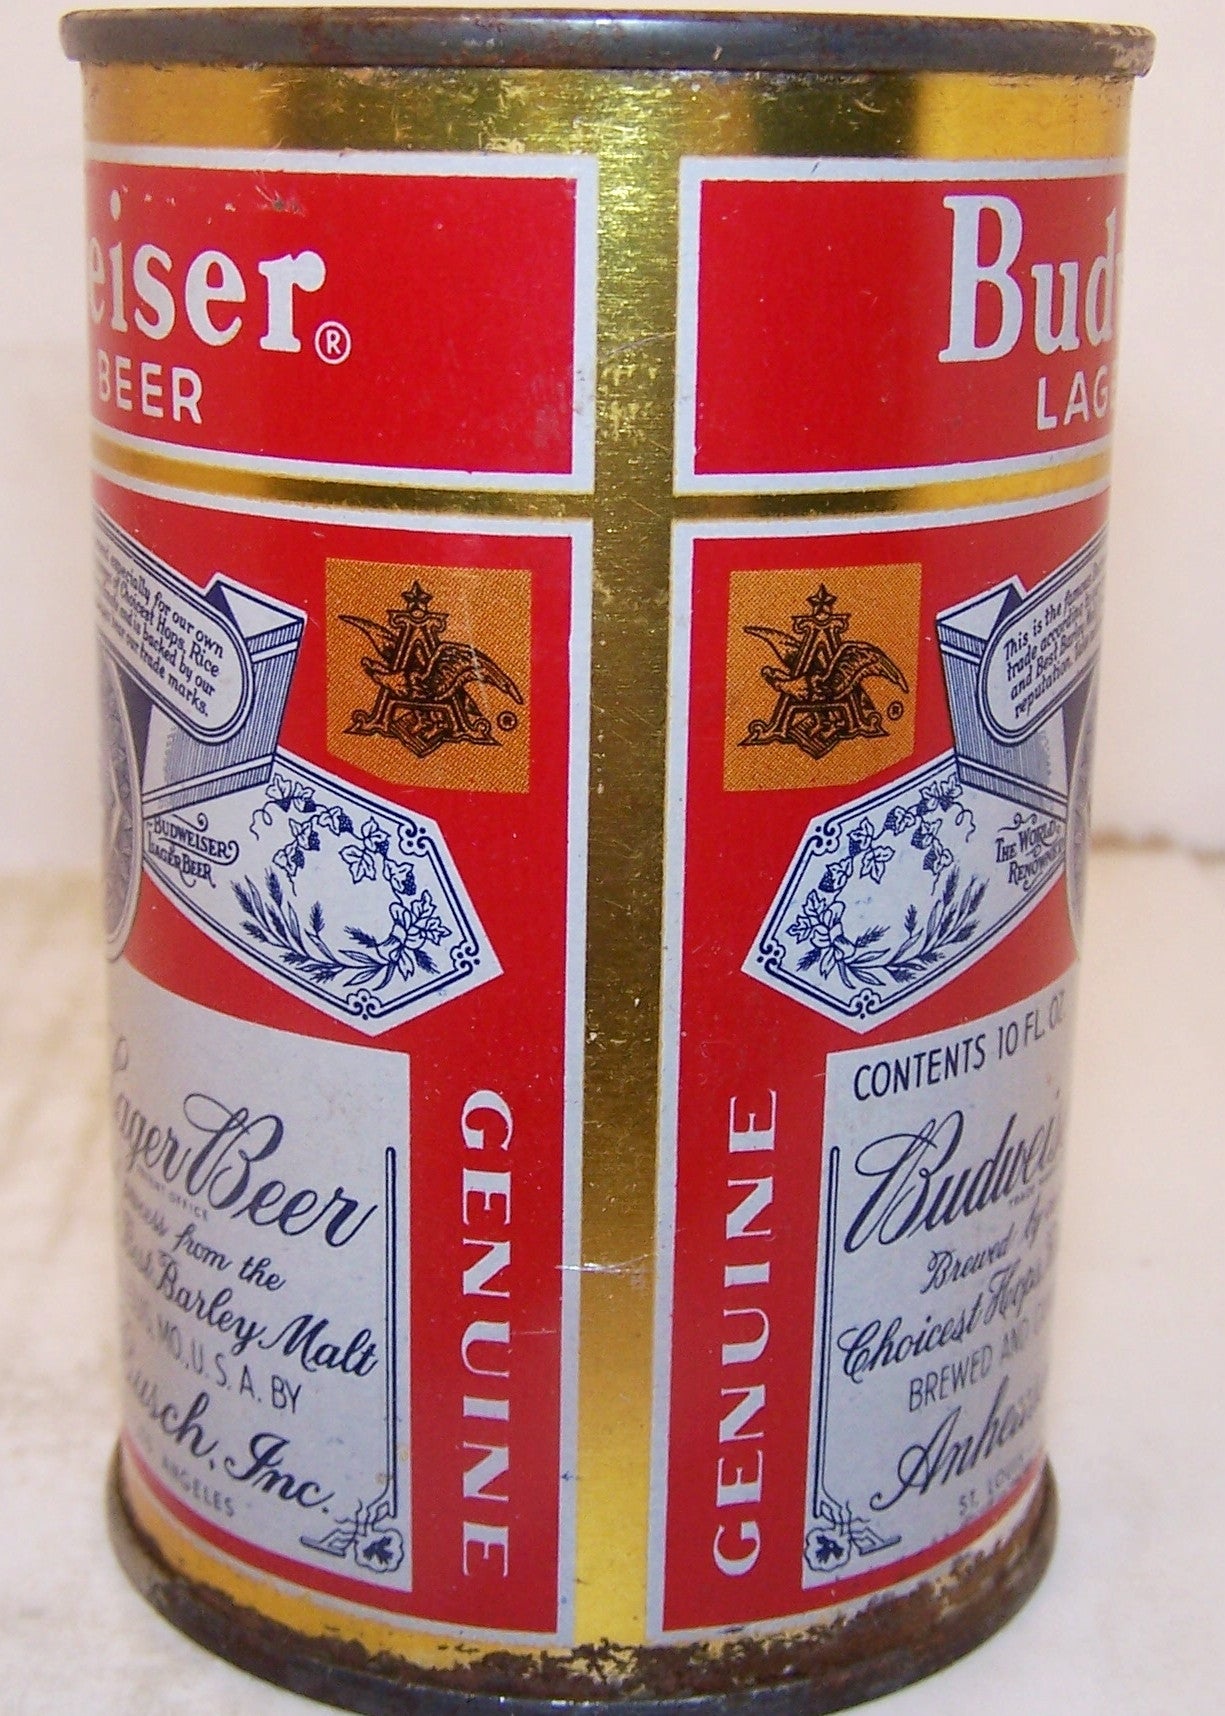 Budweiser 10 ounce Lager Beer, USBC 44-9 Grade 1- Sold on 10/11/15